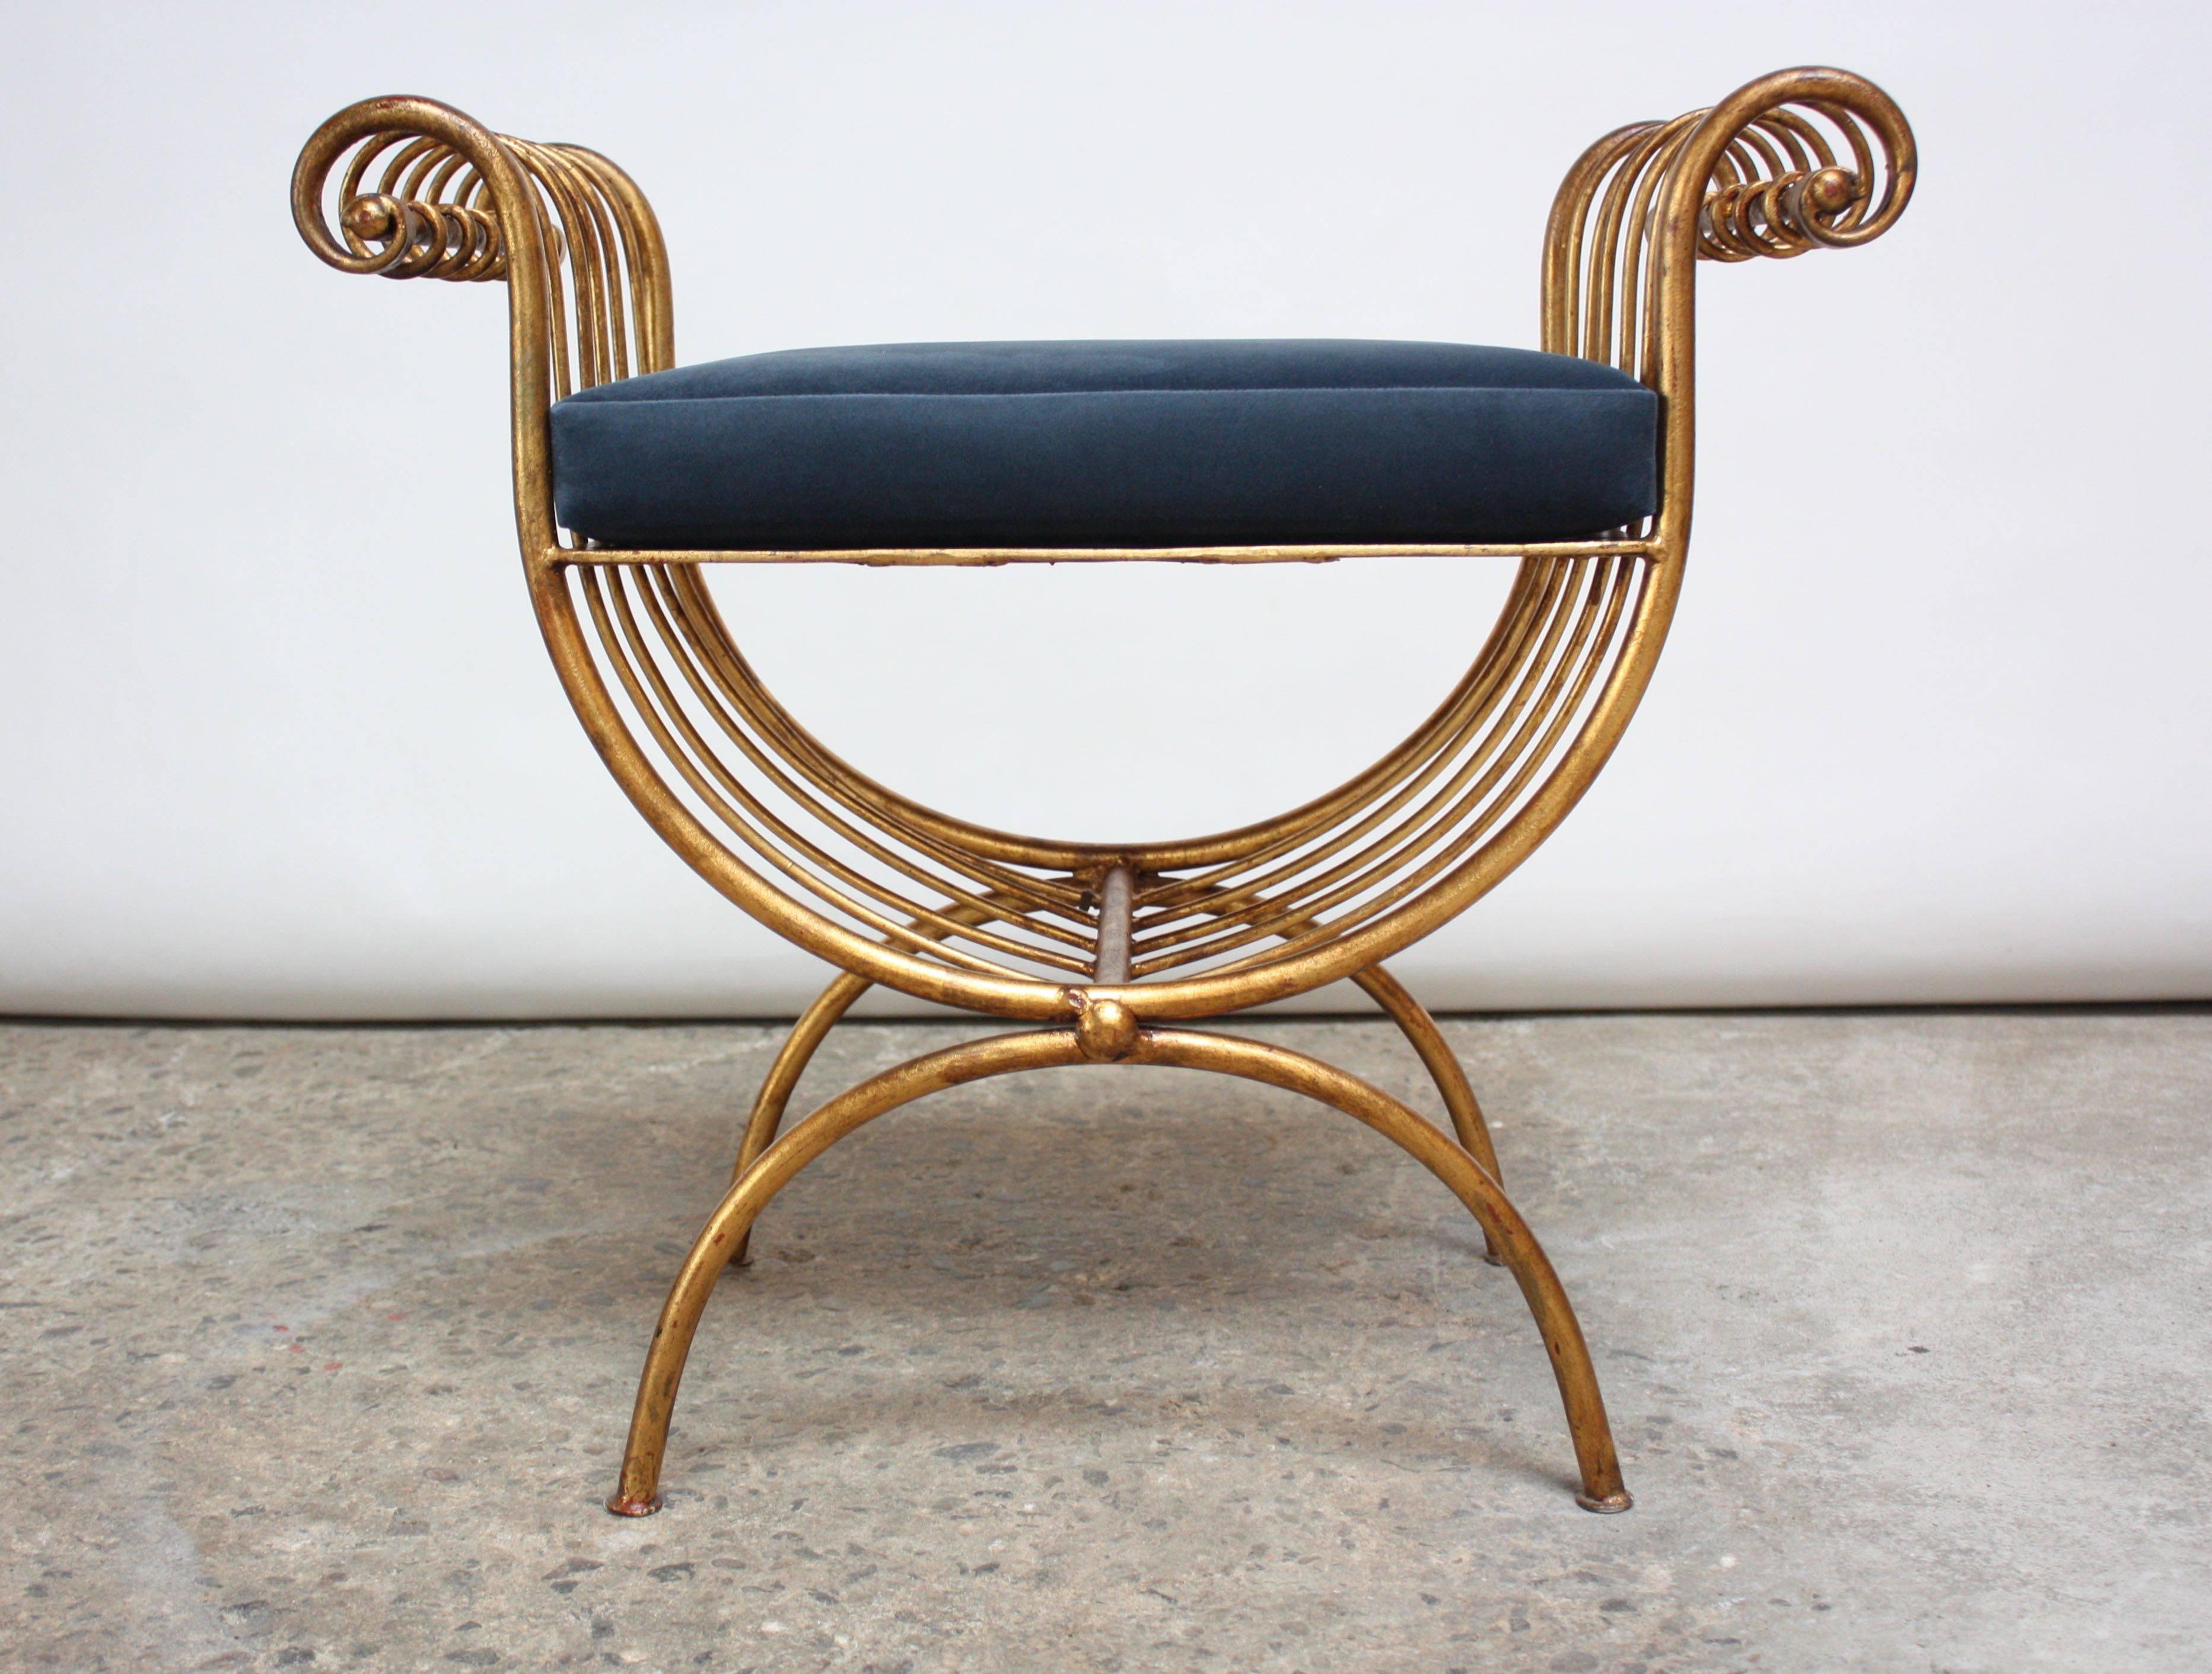 This S. Salvadori 1950s Italian stool or small bench is composed of a gilt-metal frame and velvet cushion. Inspired by a lyre's form with a frame resembling strings that branch out into curved arms. Retains a metal hang tag marked Italy.
There is